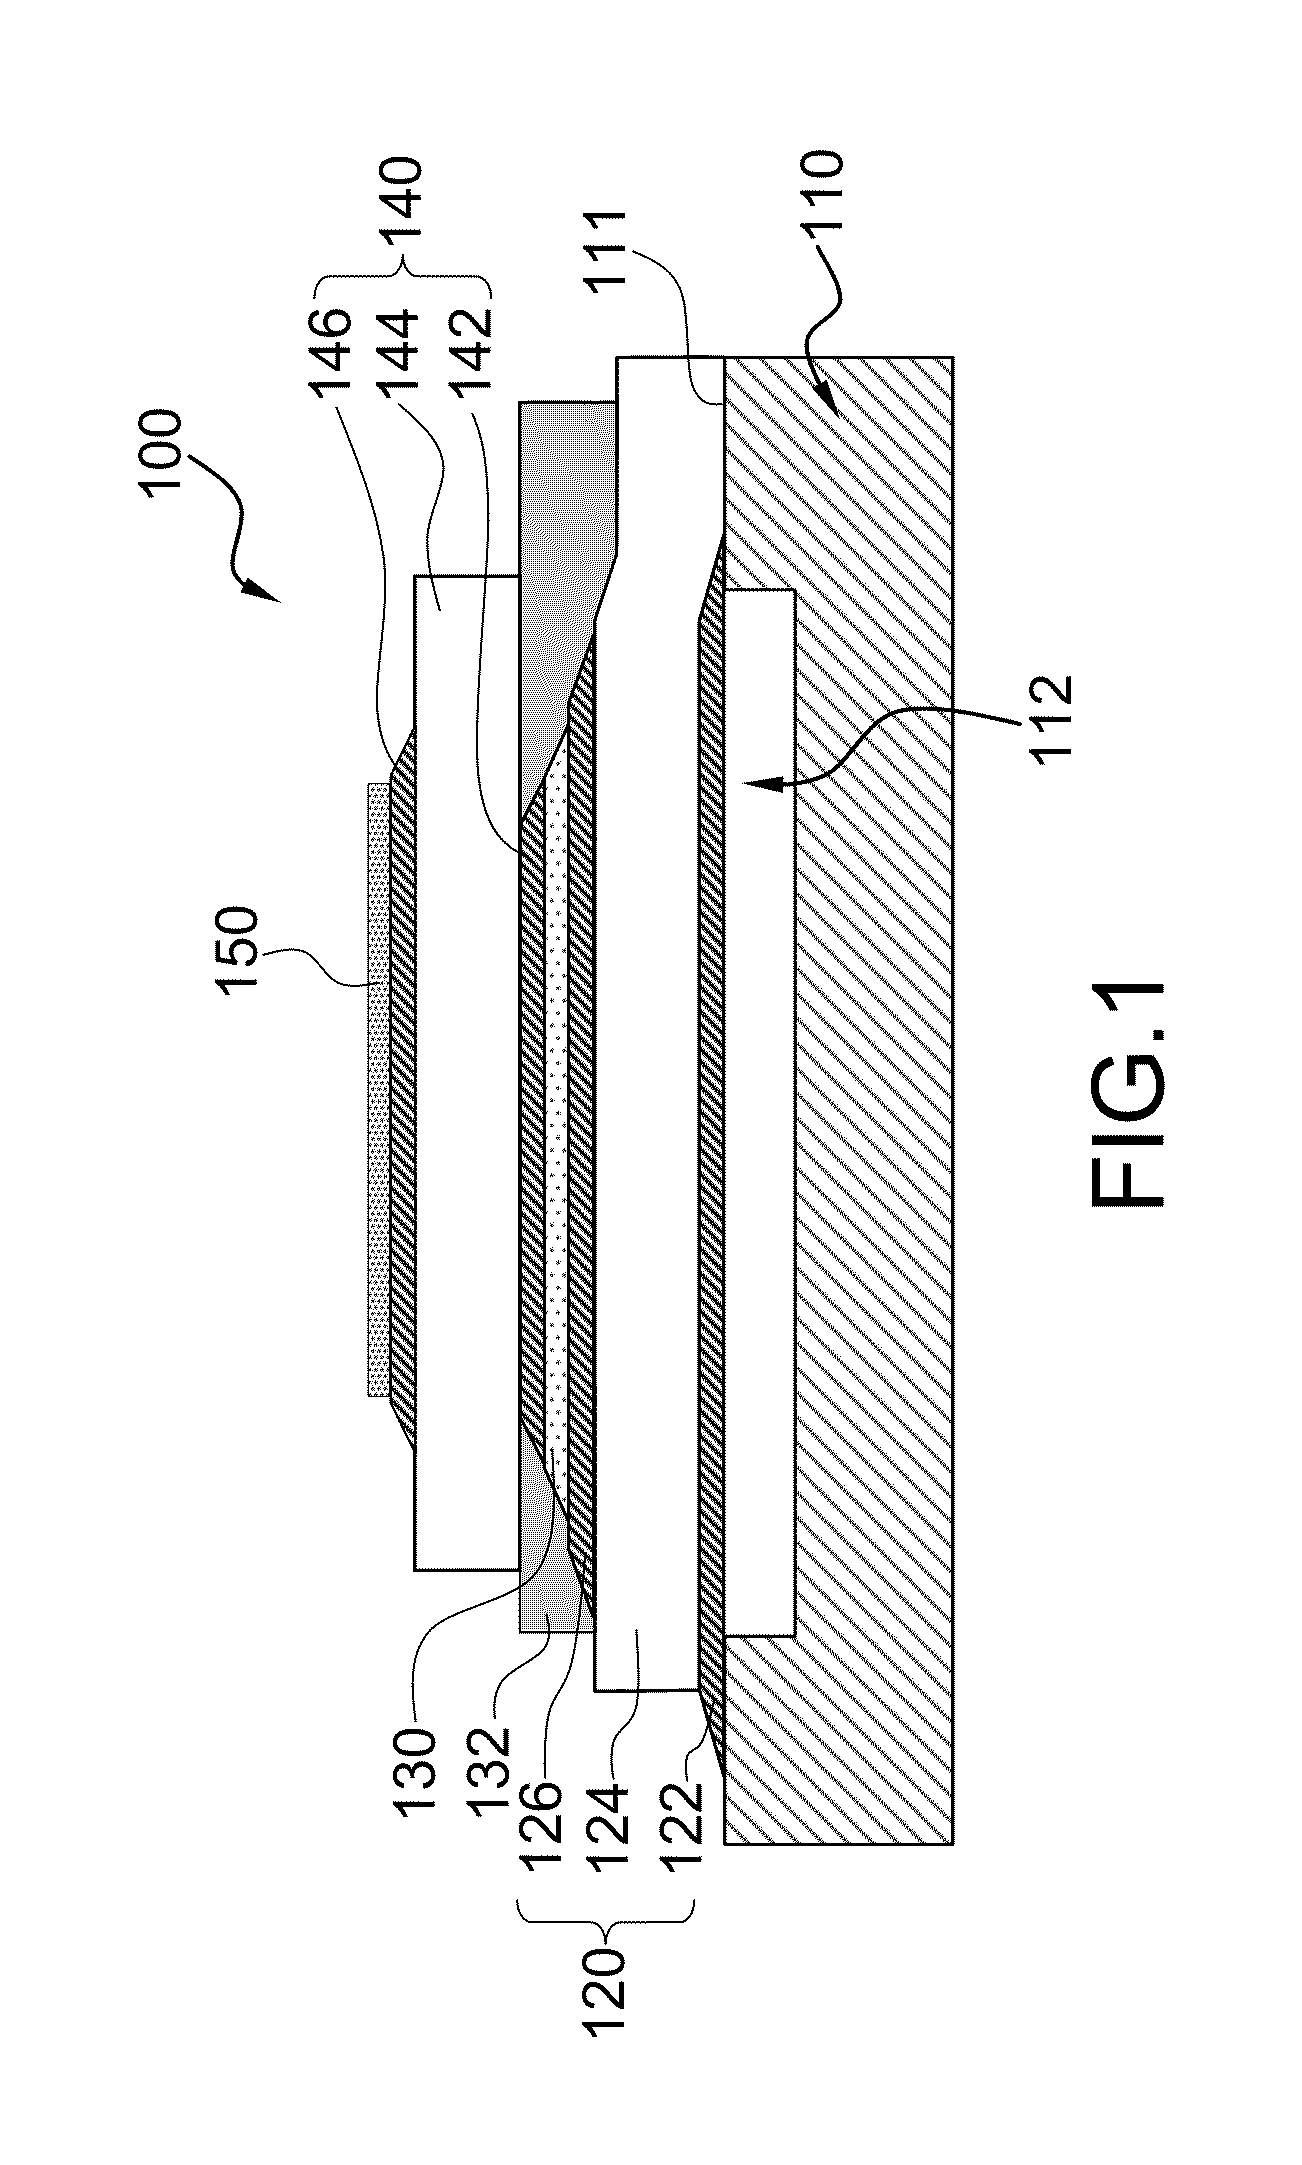 Methods for wafer level trimming of acoustically coupled resonator filter